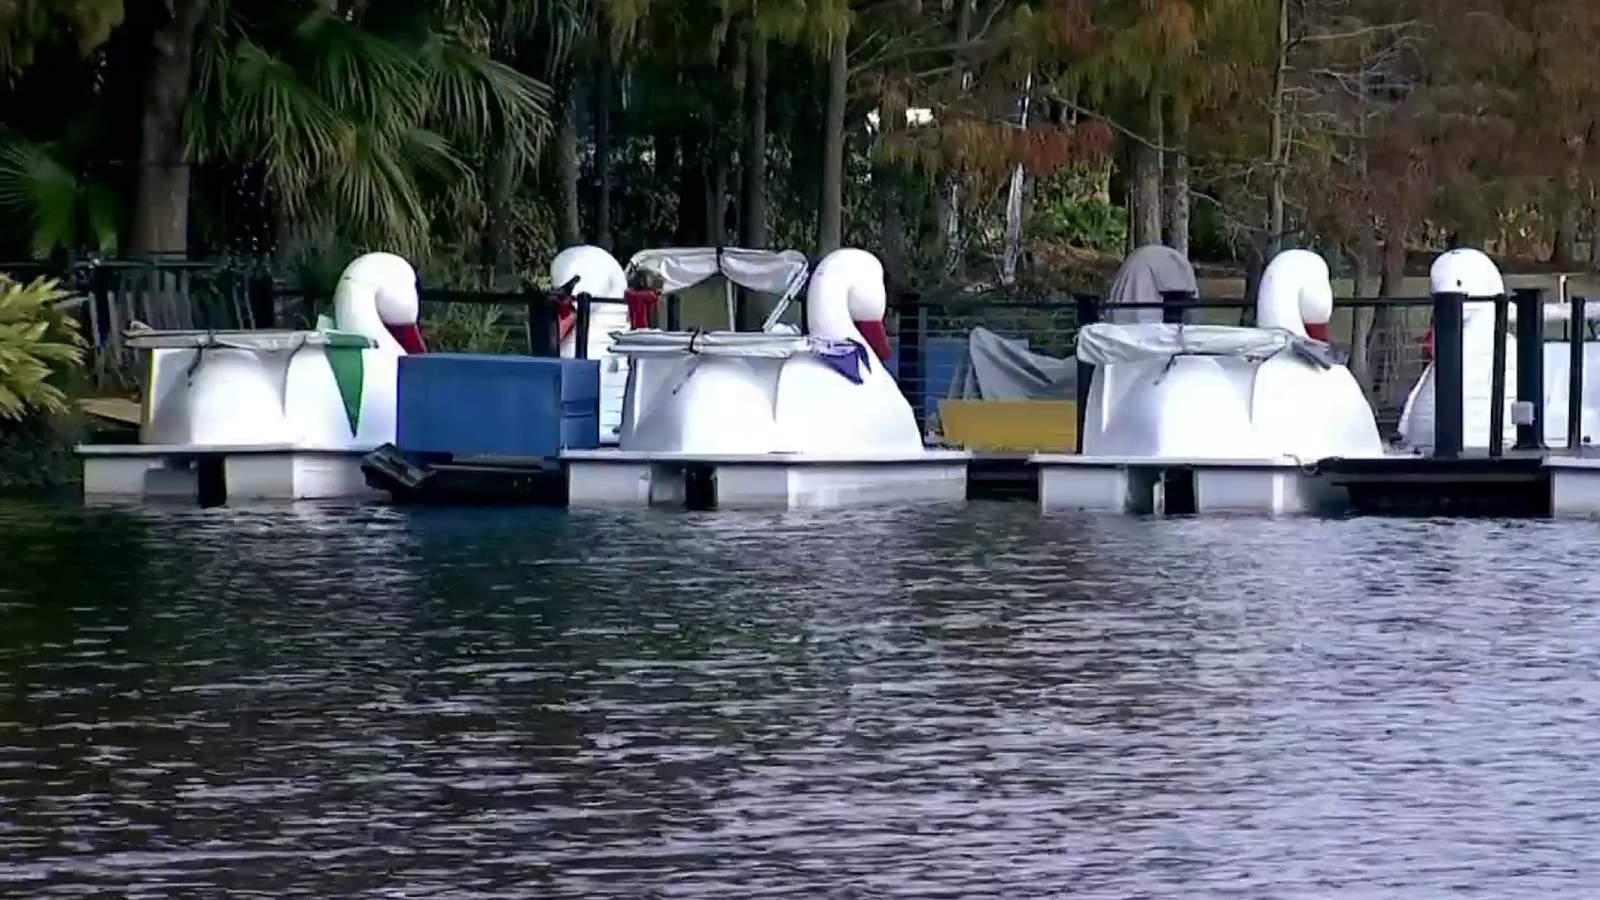 Bacteria levels back to normal, swan boat rentals can resume at Lake Eola